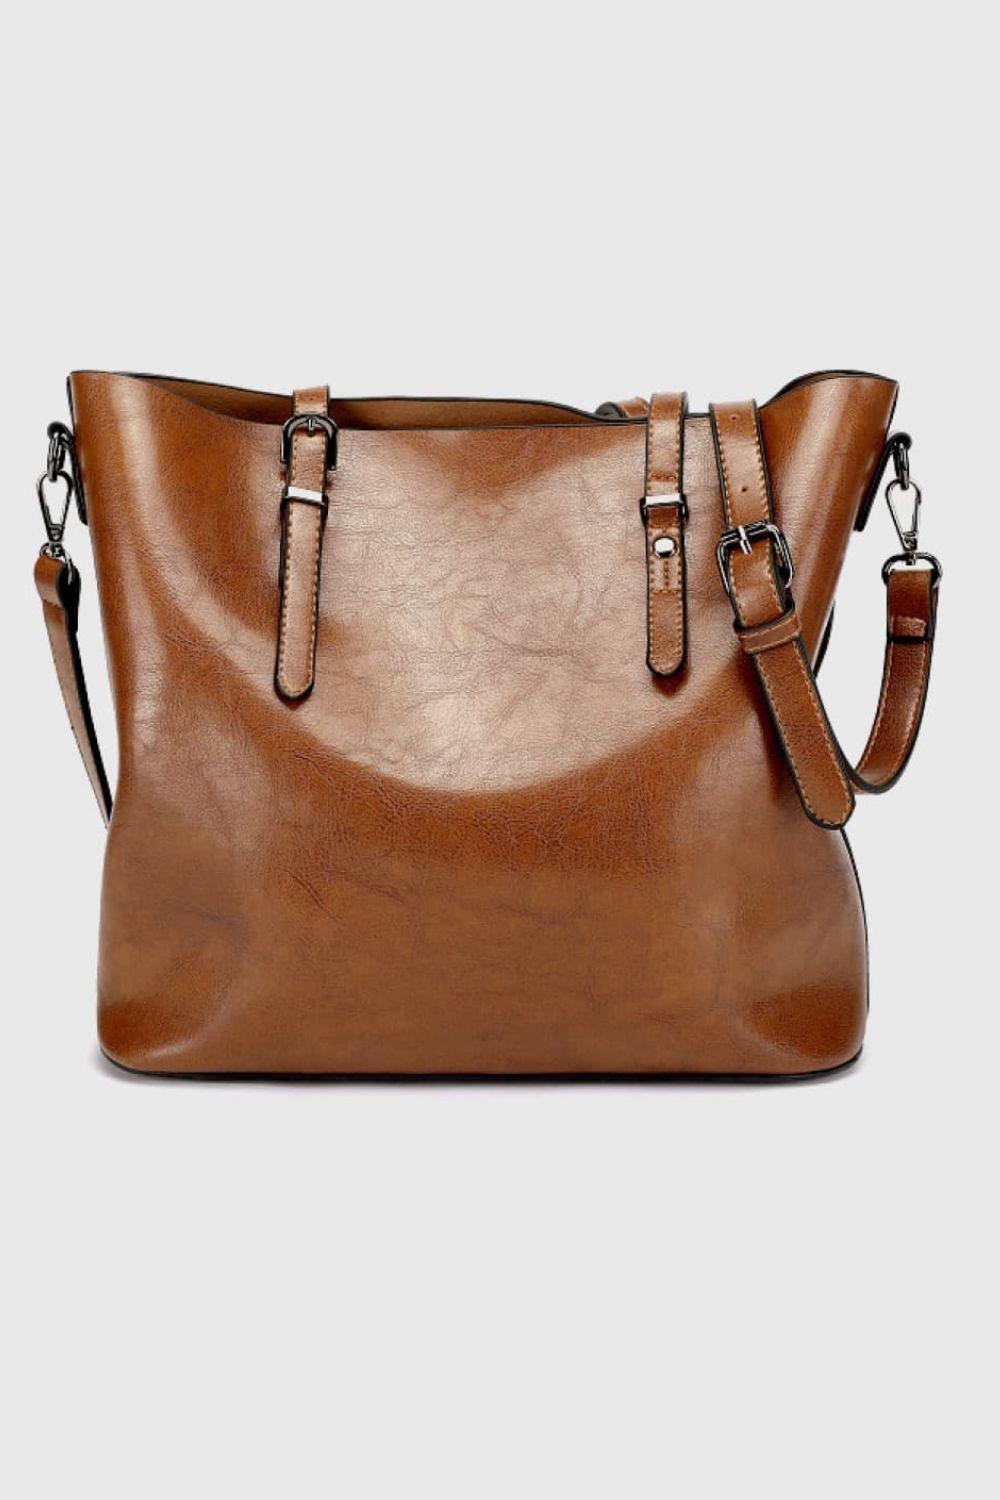 Luxe Carry All Large Leather Tote Bag - MXSTUDIO.COM